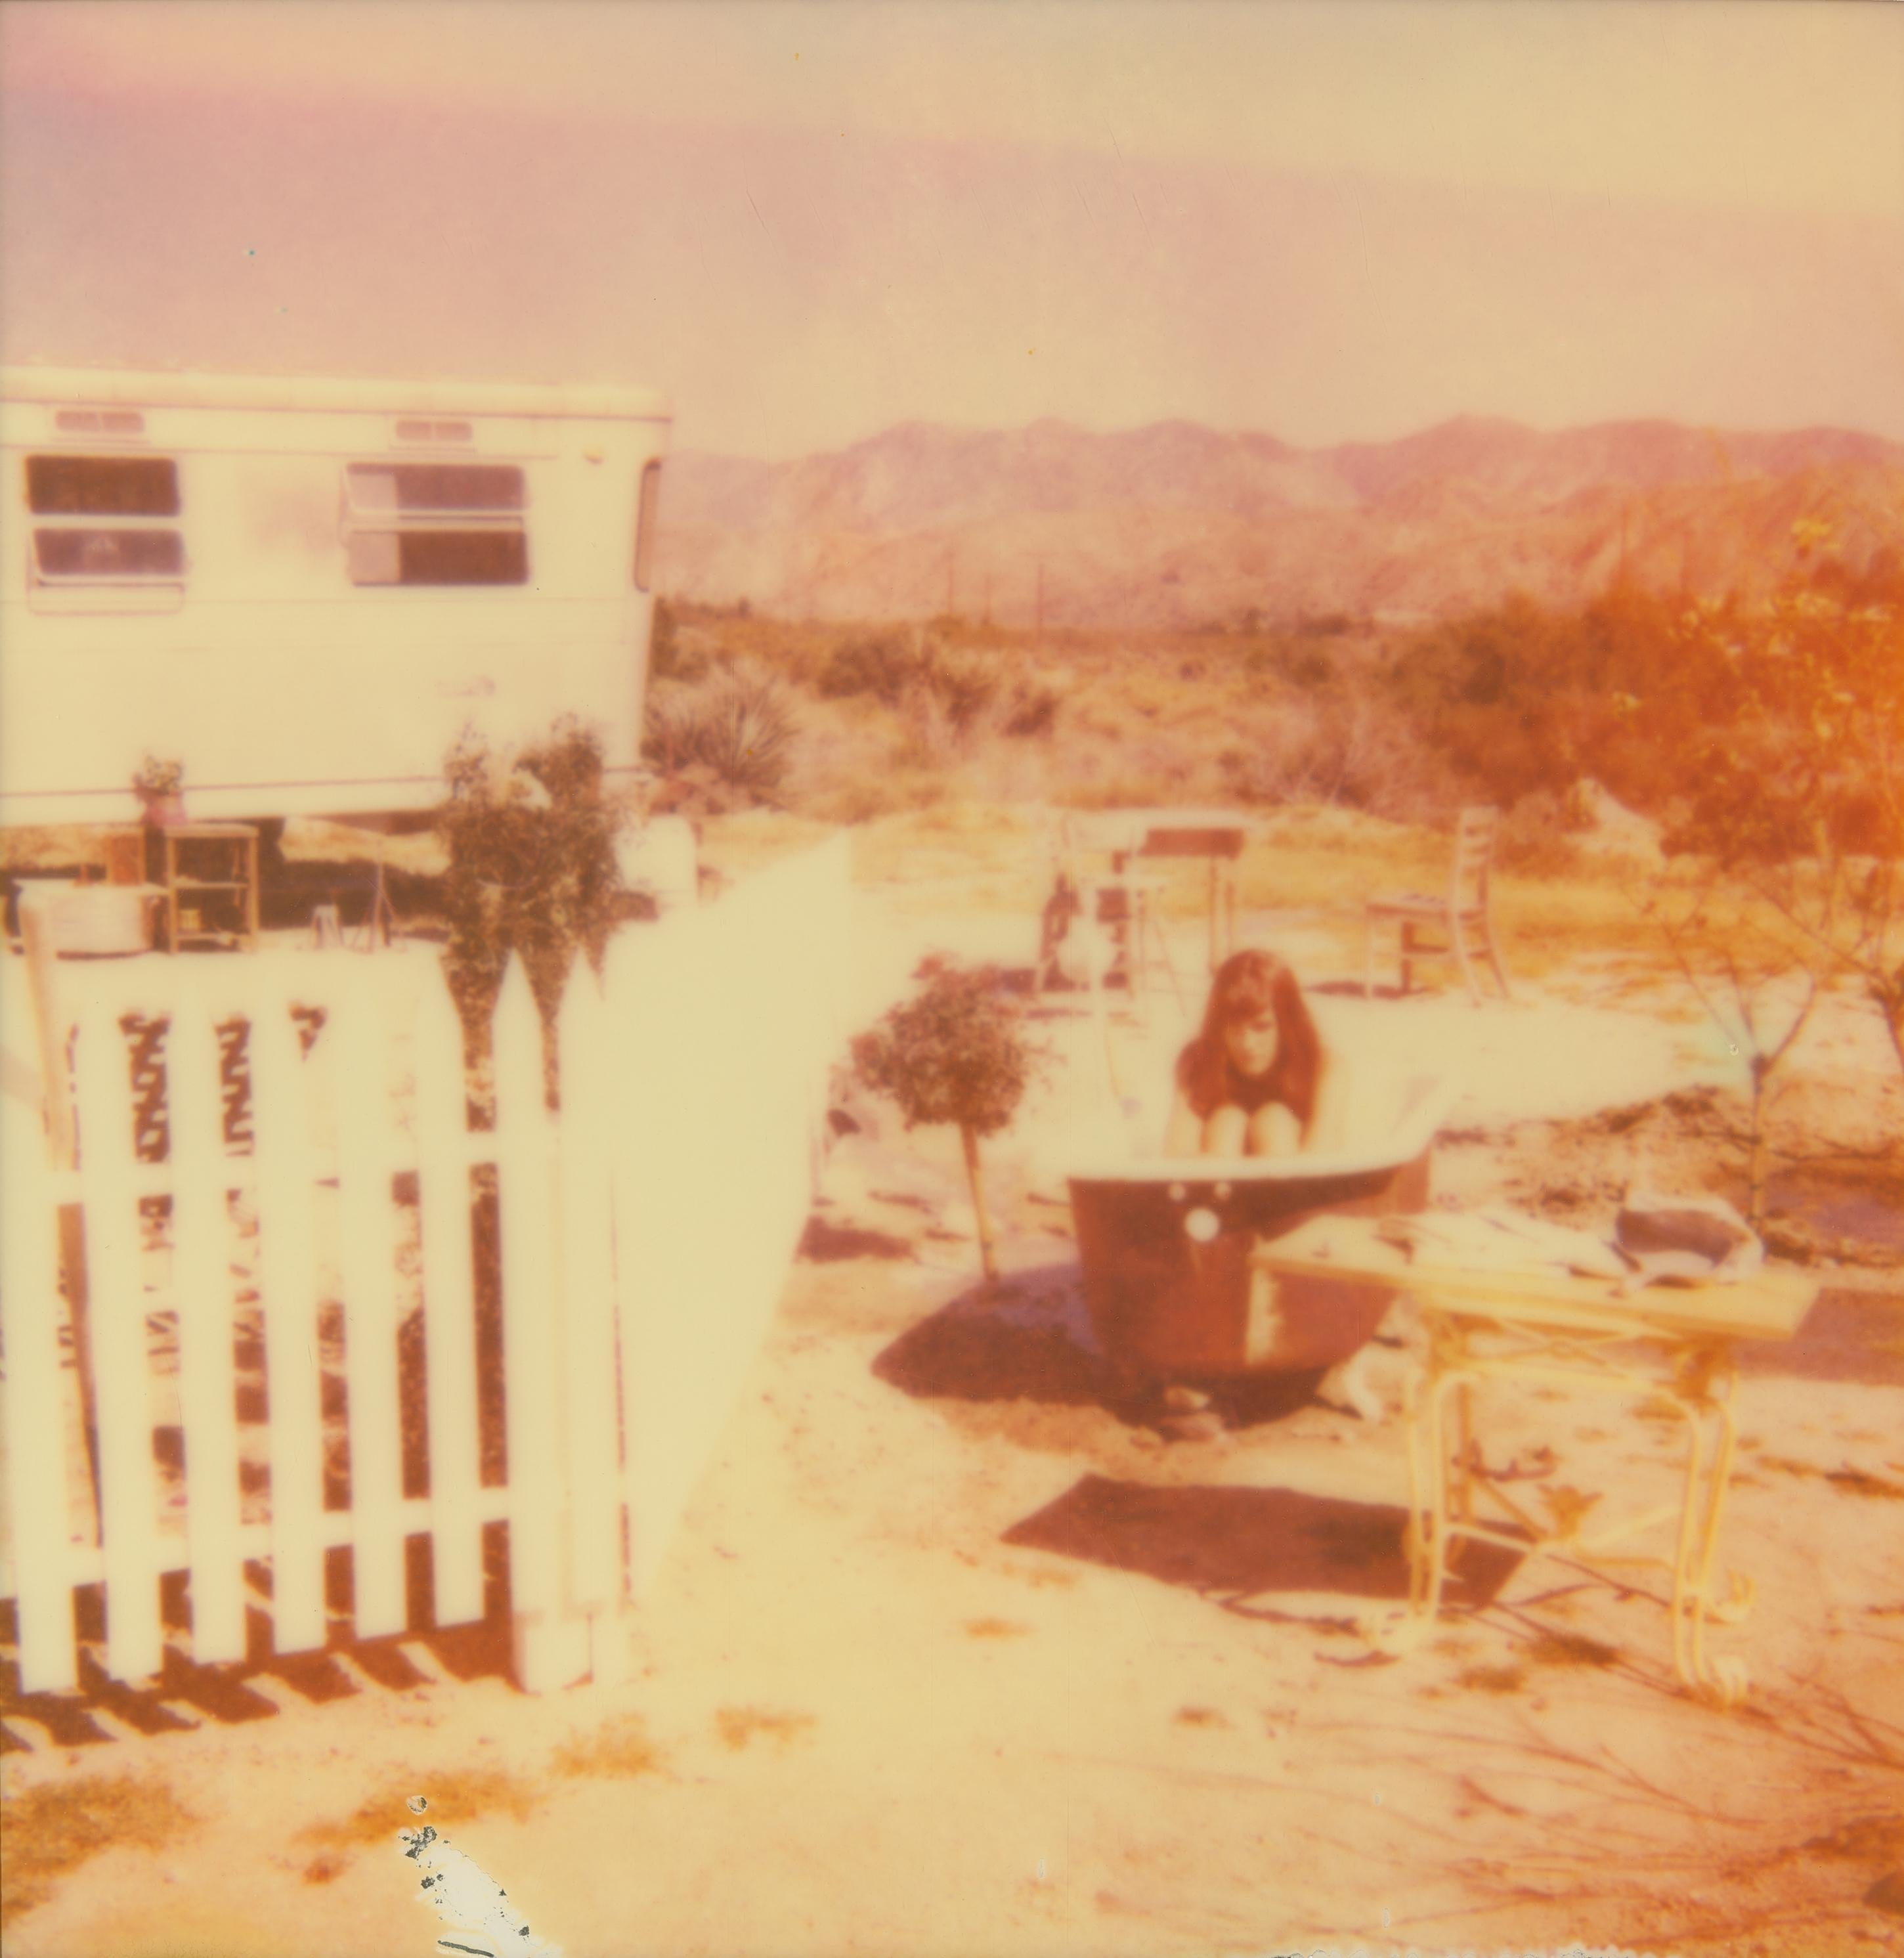 Stefanie Schneider Color Photograph - The Girl I (The Girl behind the White Picket Fence), mounted